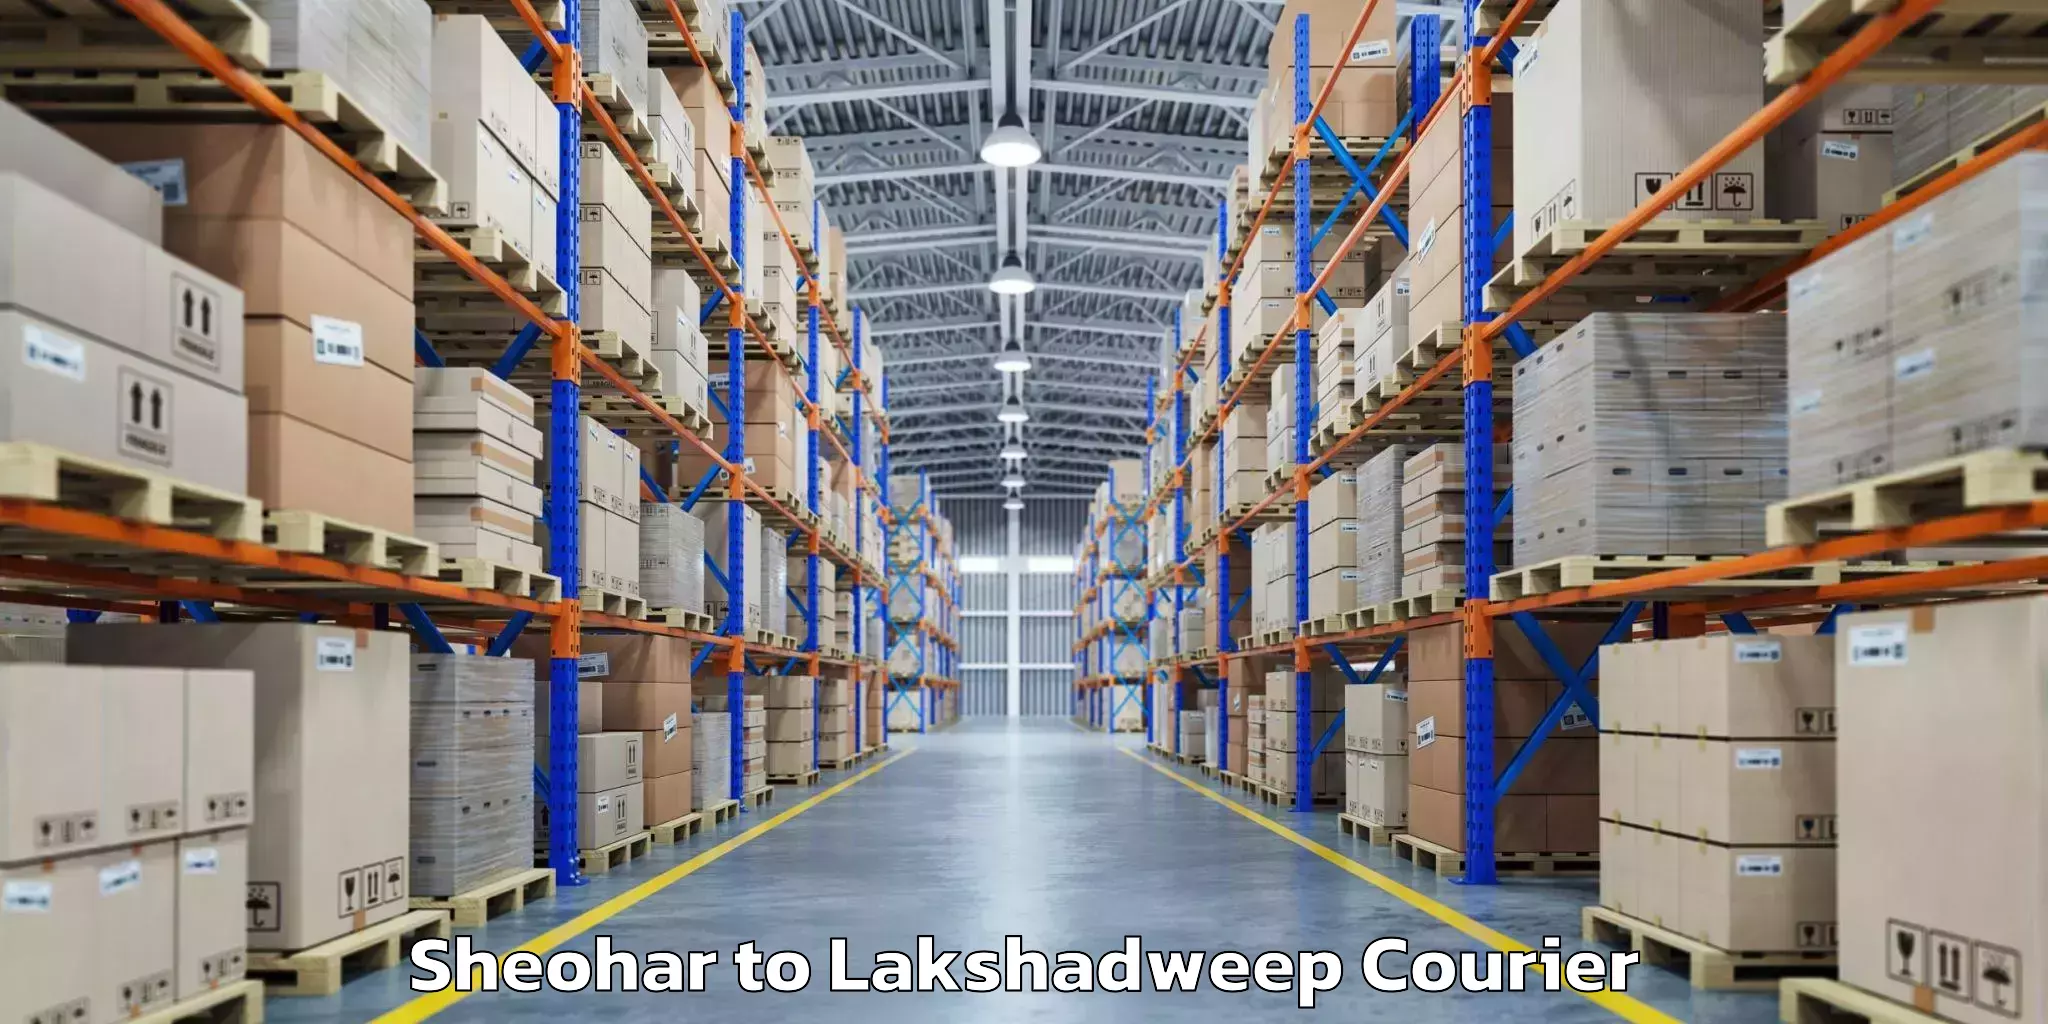 Luggage delivery system Sheohar to Lakshadweep